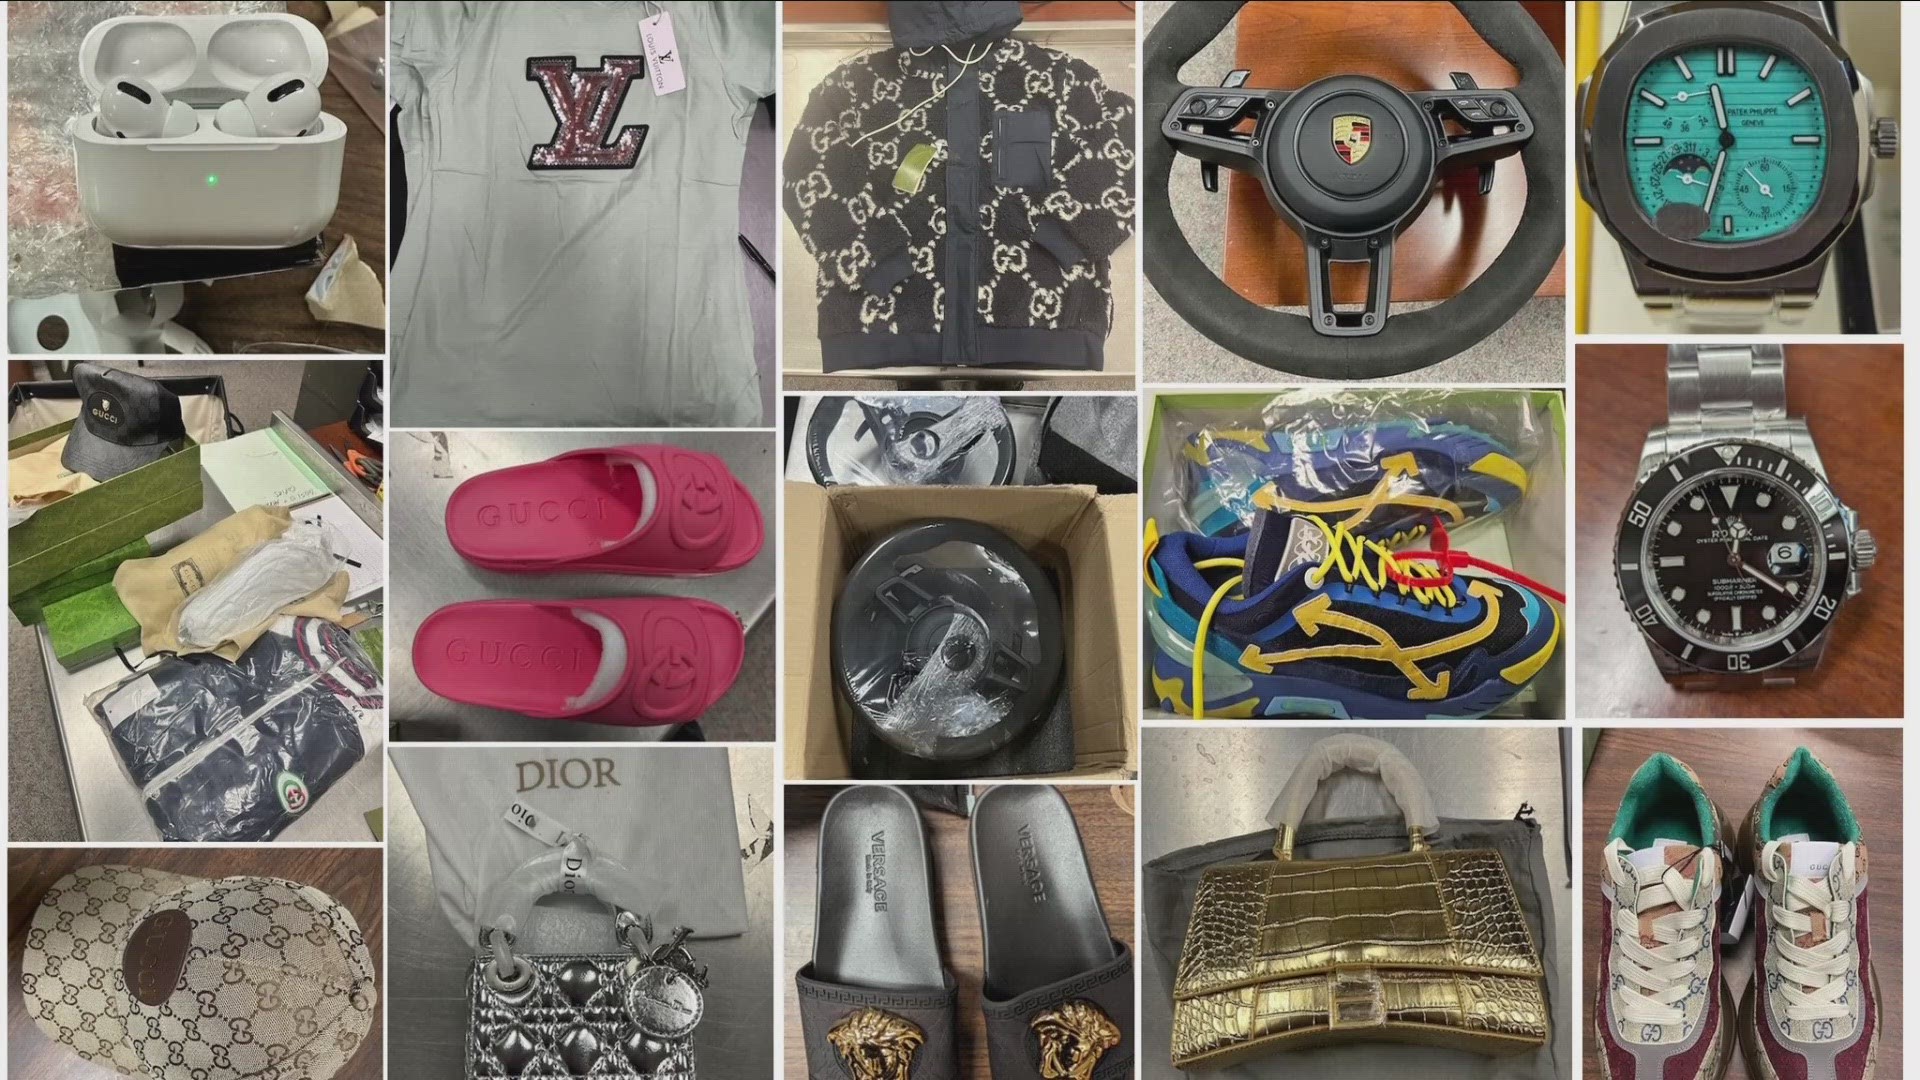 U-S Customs and Border Protection officers at the Rochester Port of Entry have seized various designer items that have counterfeit trademarks